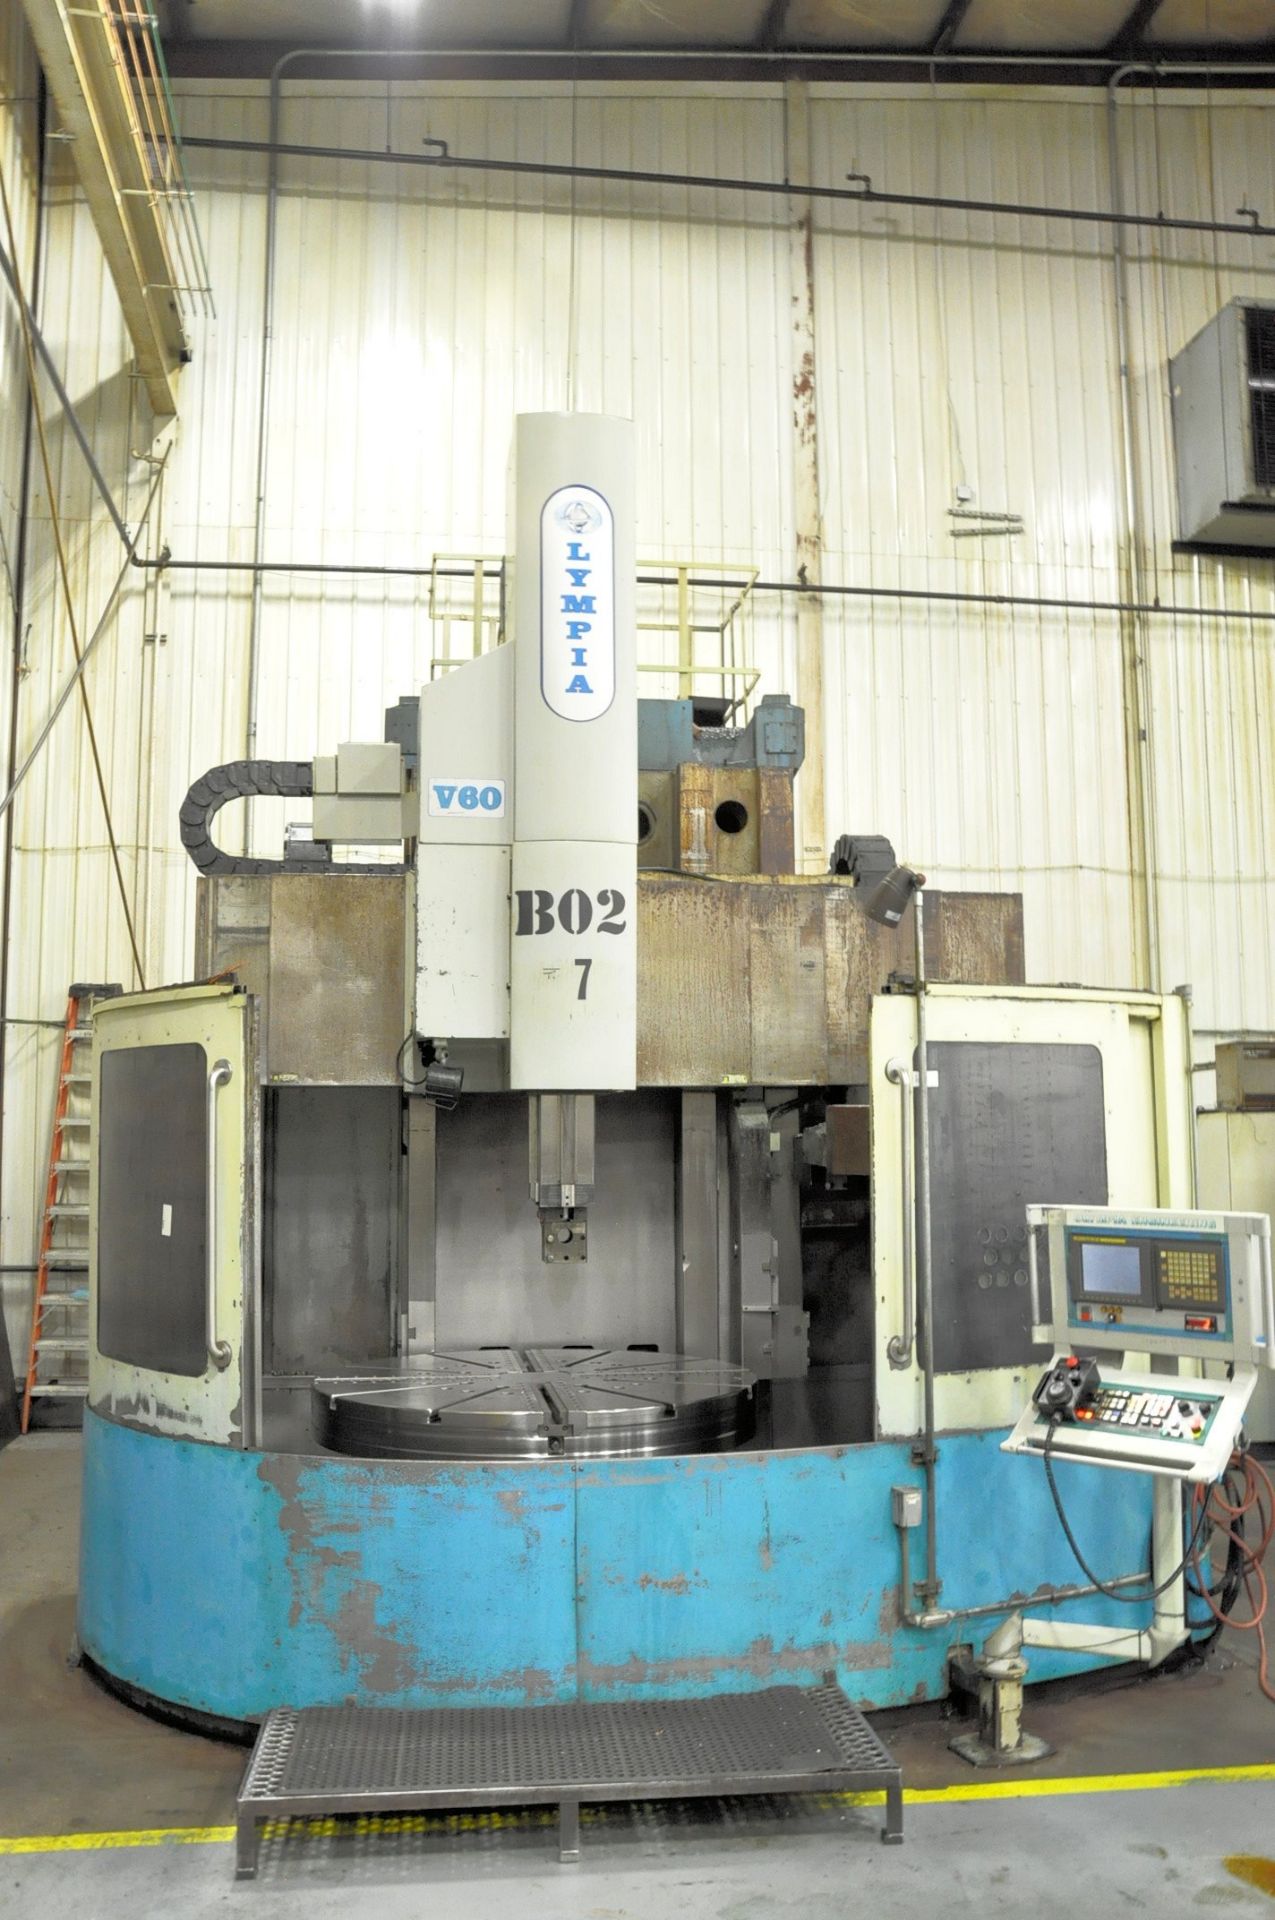 66'' OLYMPIA V60 CNC Vertical Boring Mill, 66'' Table Dia., 70'' Max. Swing, 62'' Max Height Under